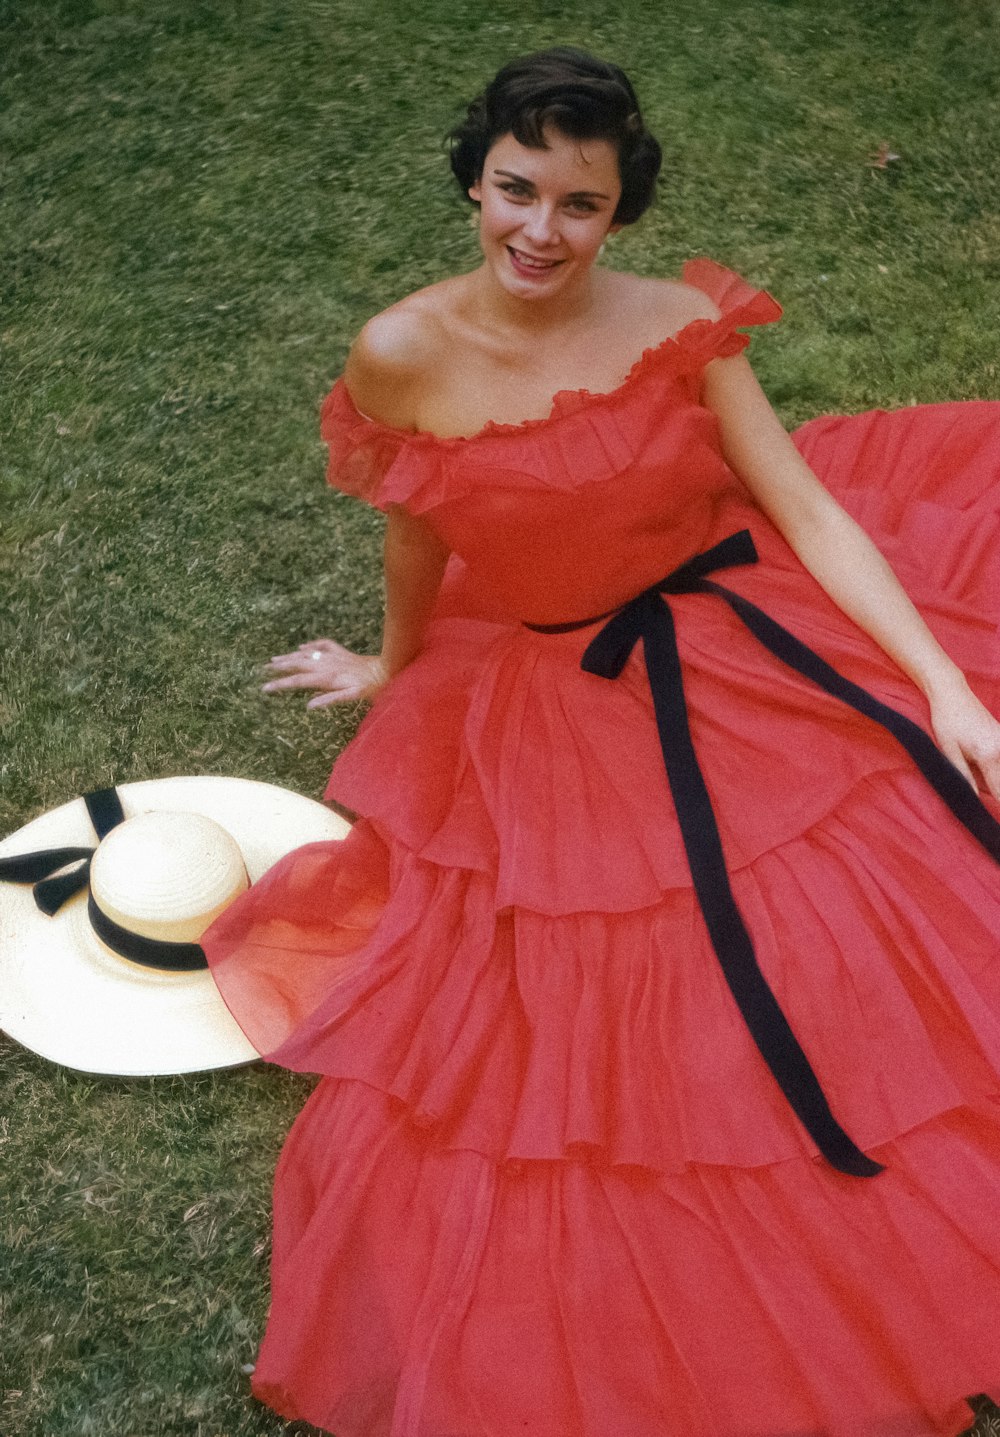 a woman in a red dress is sitting on the grass